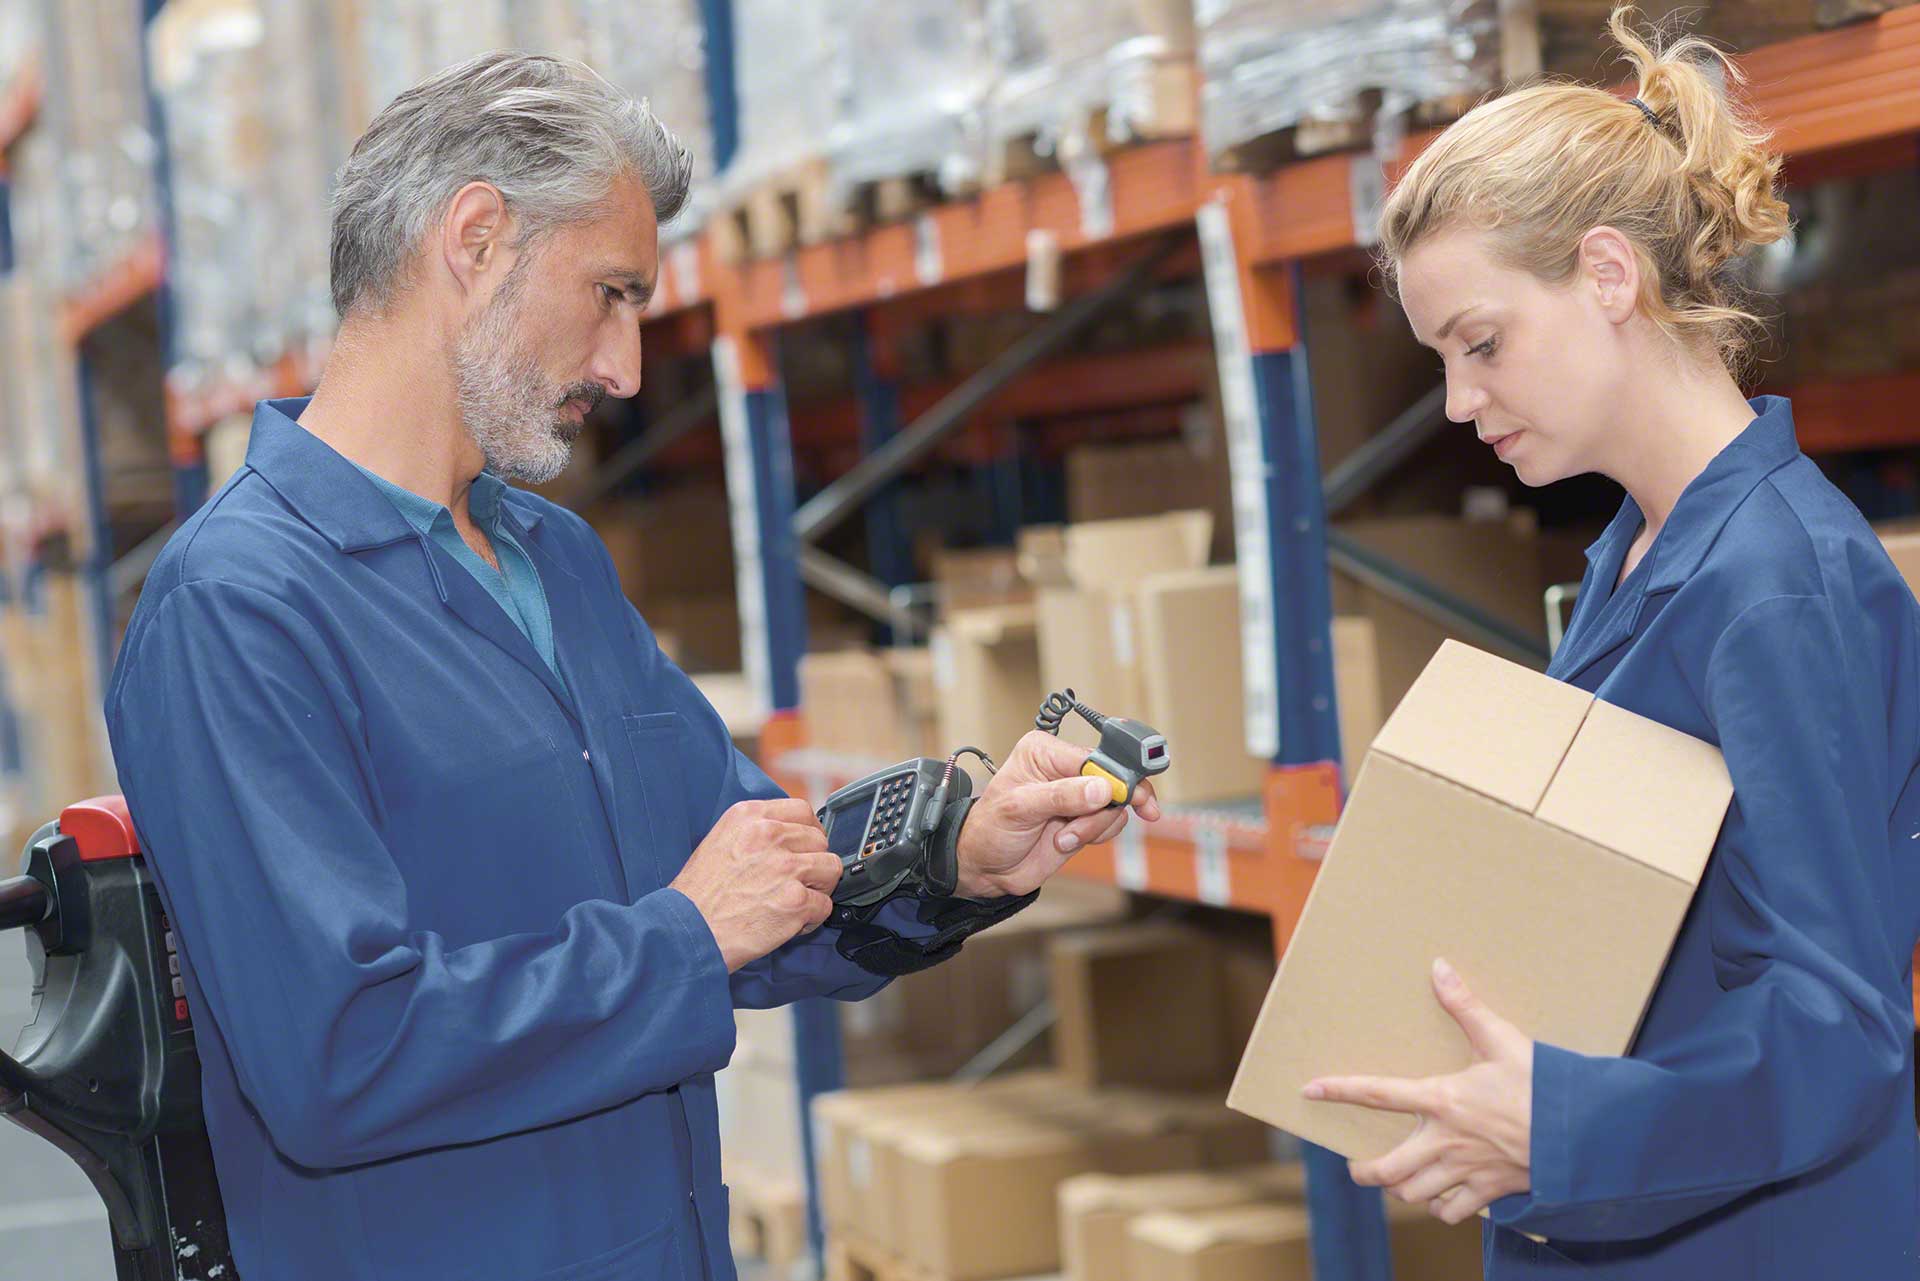 Augmented reality and wearables facilitate the work of warehouse operators